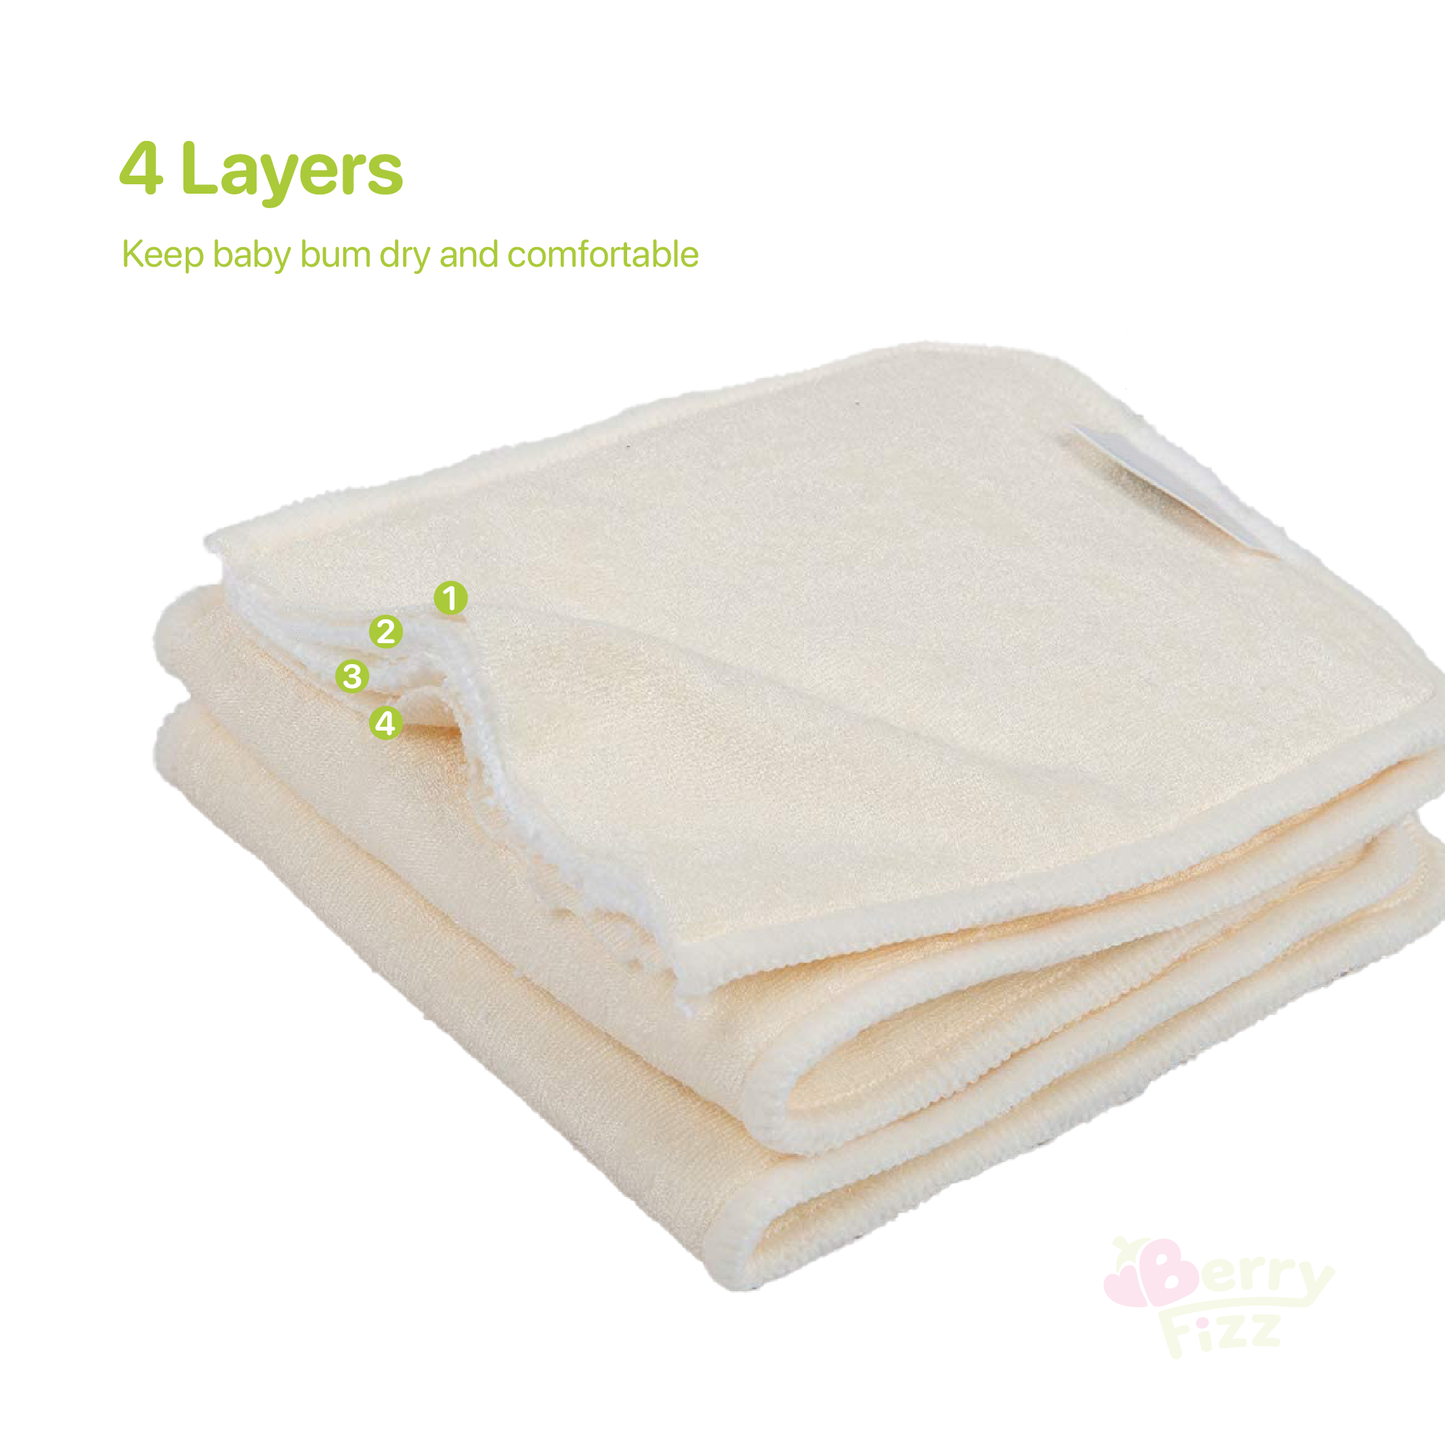 10 Pack Cloth Baby Diaper Inserts Liner 4 Layers Bamboo Microfiber Reusable Super Absorbent for Newborn